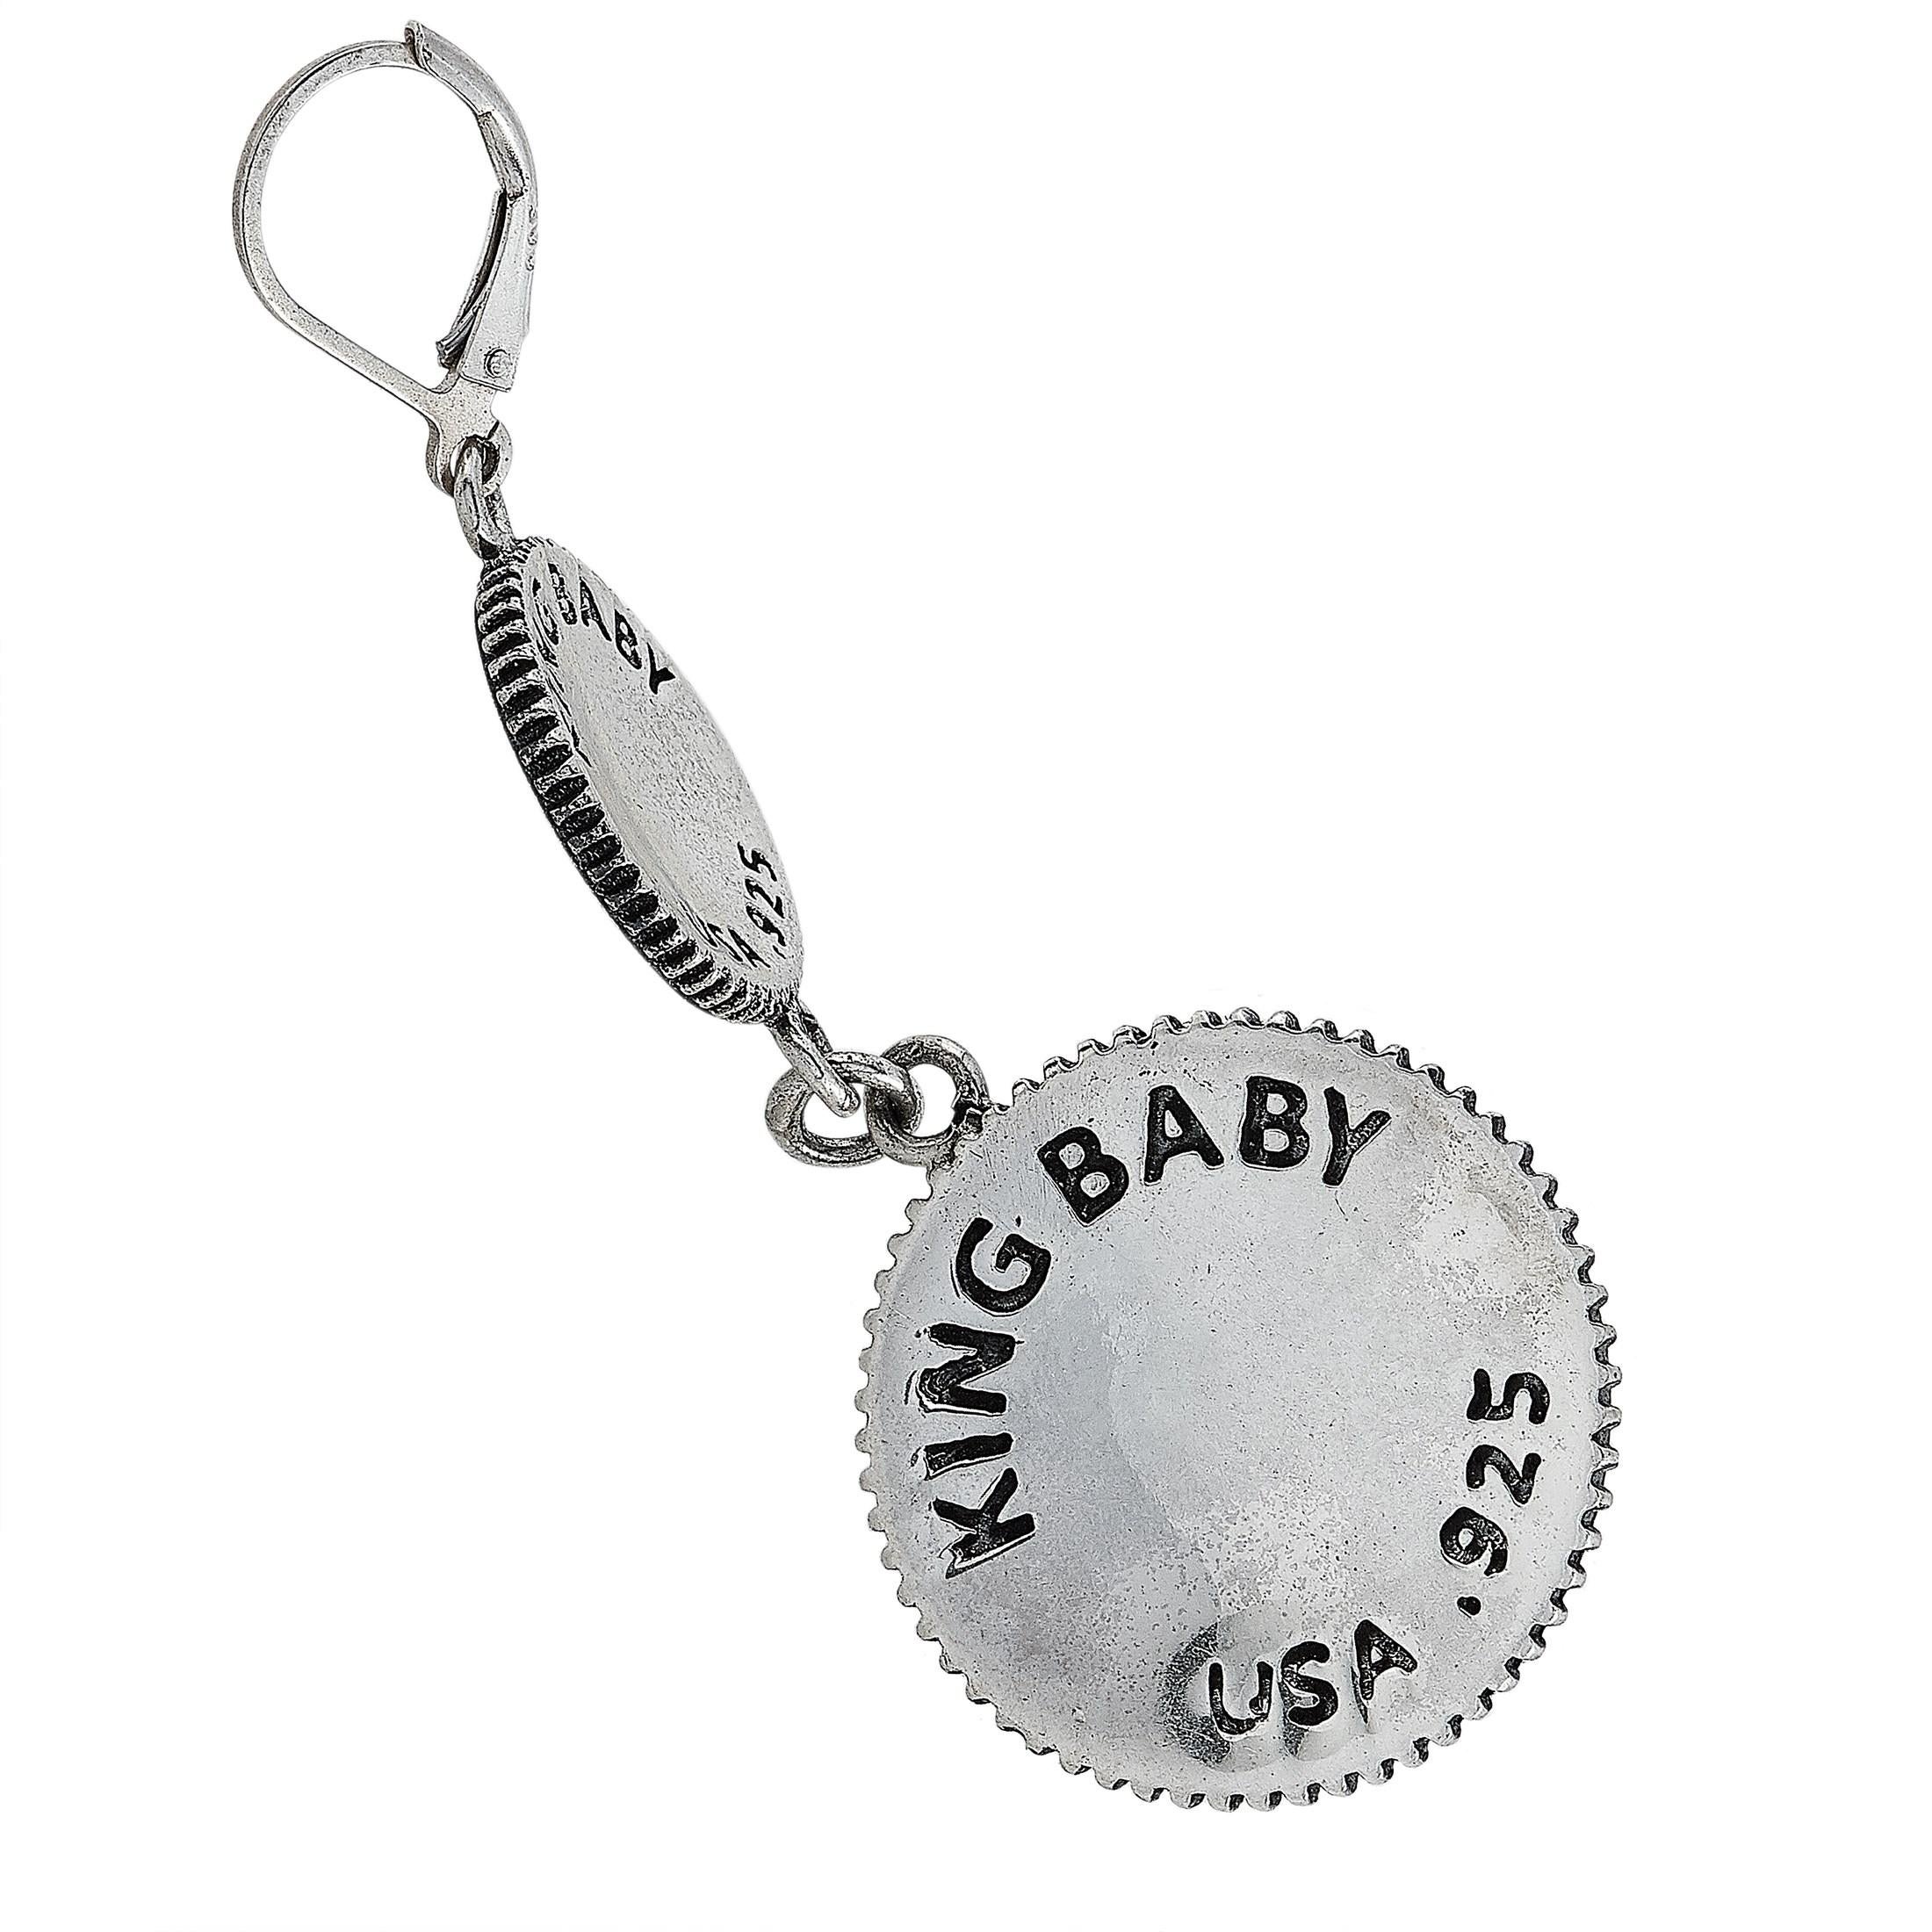 These King Baby earrings are made of silver and each of the two weighs 14.1 grams, measuring 2.62” in length and 0.90” in width.

The pair is offered in brand-new condition and includes the manufacturer’s box.